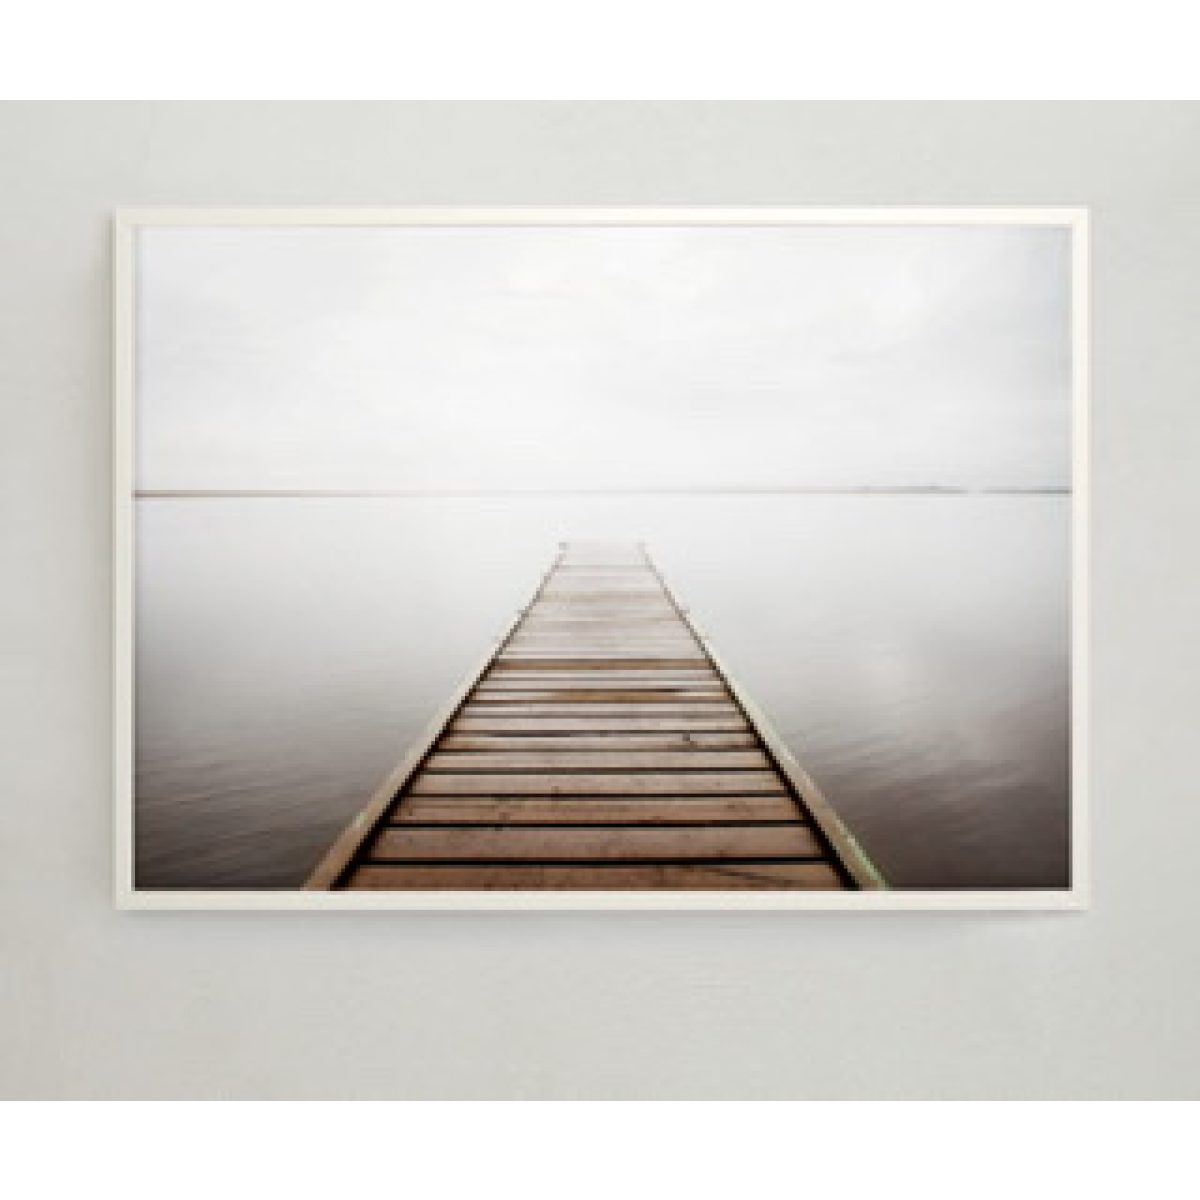 Misty Pier Poster 30x40 cm Storefactory My Home and More